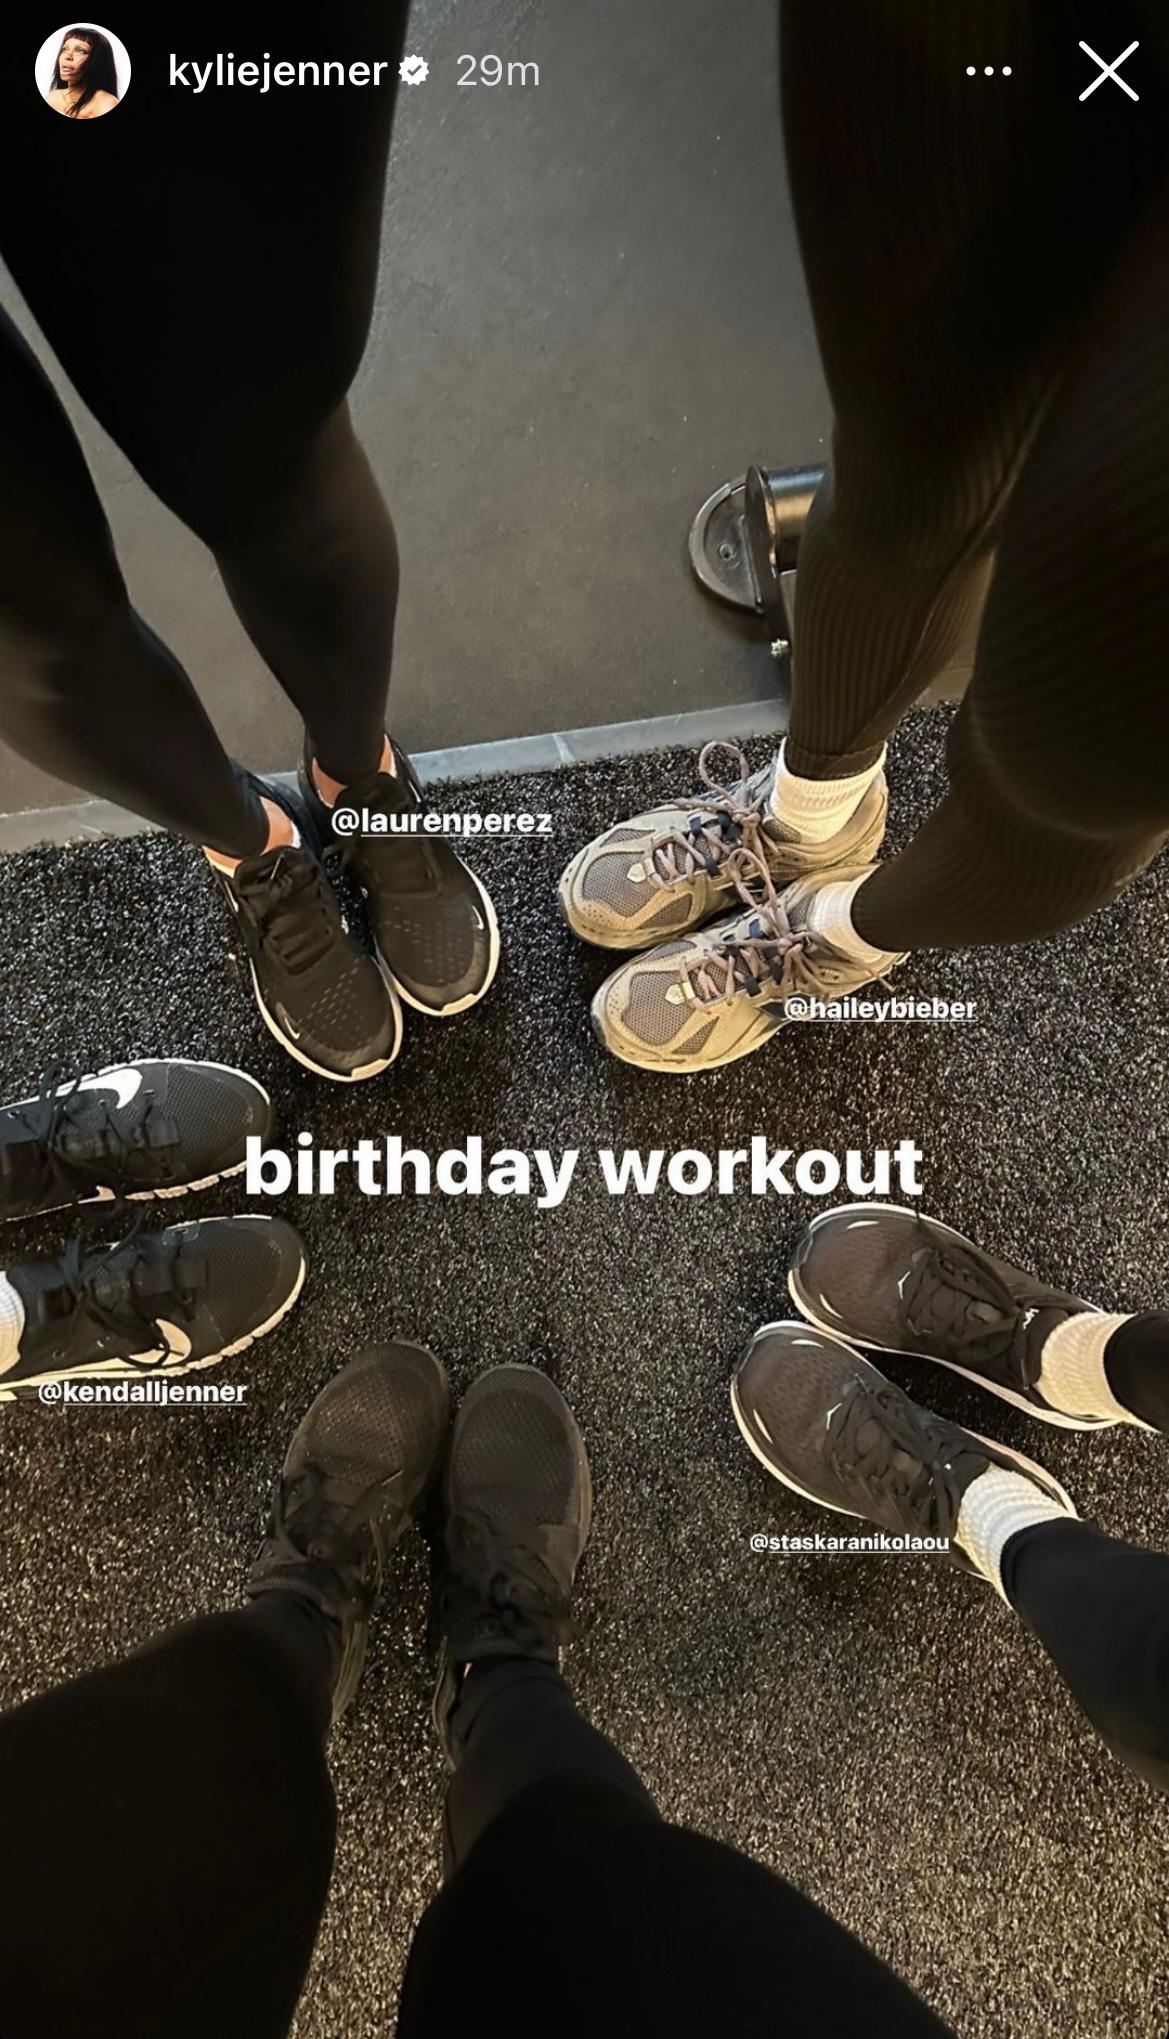 Kylie Jenner and girlfriends workout